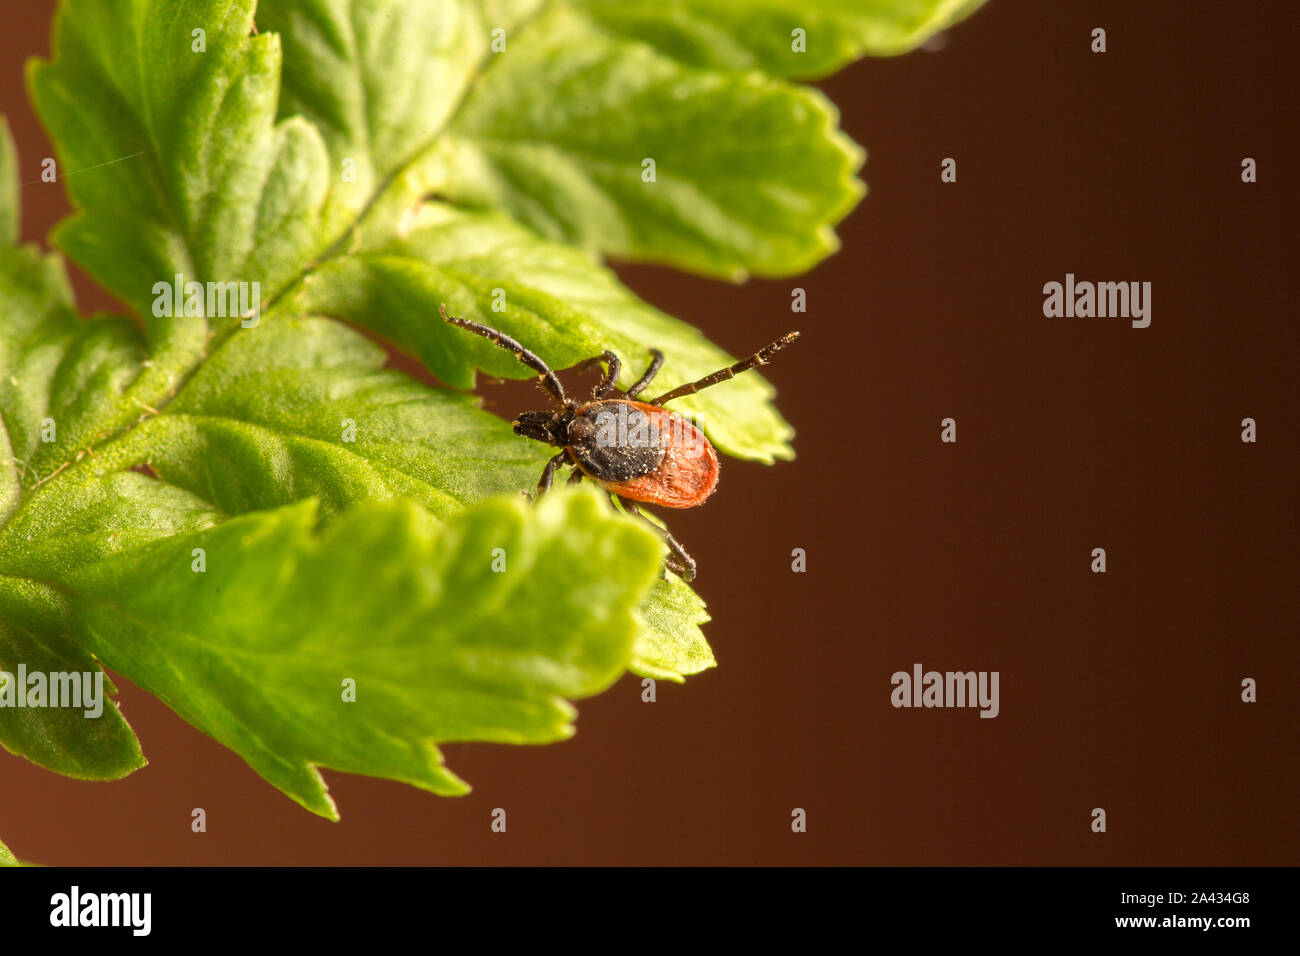 Female of the tick sitting on a leaf, brown background. A common European parasite attacking also humans. Stock Photo